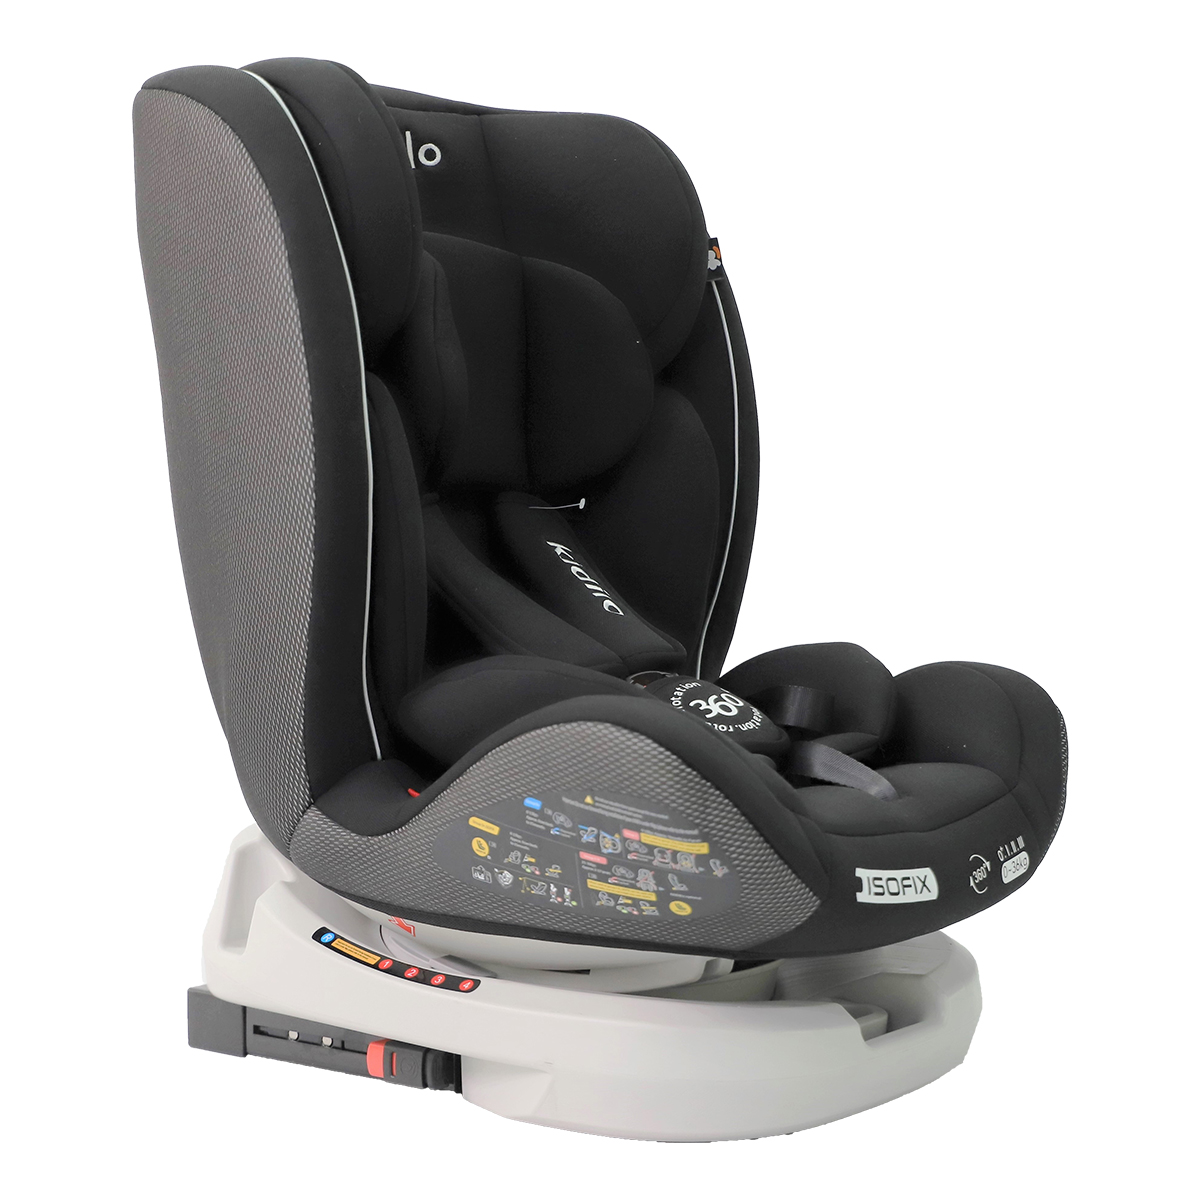 Kidilo 360 rotate Car Seat with Isofix - Black&Charcoal